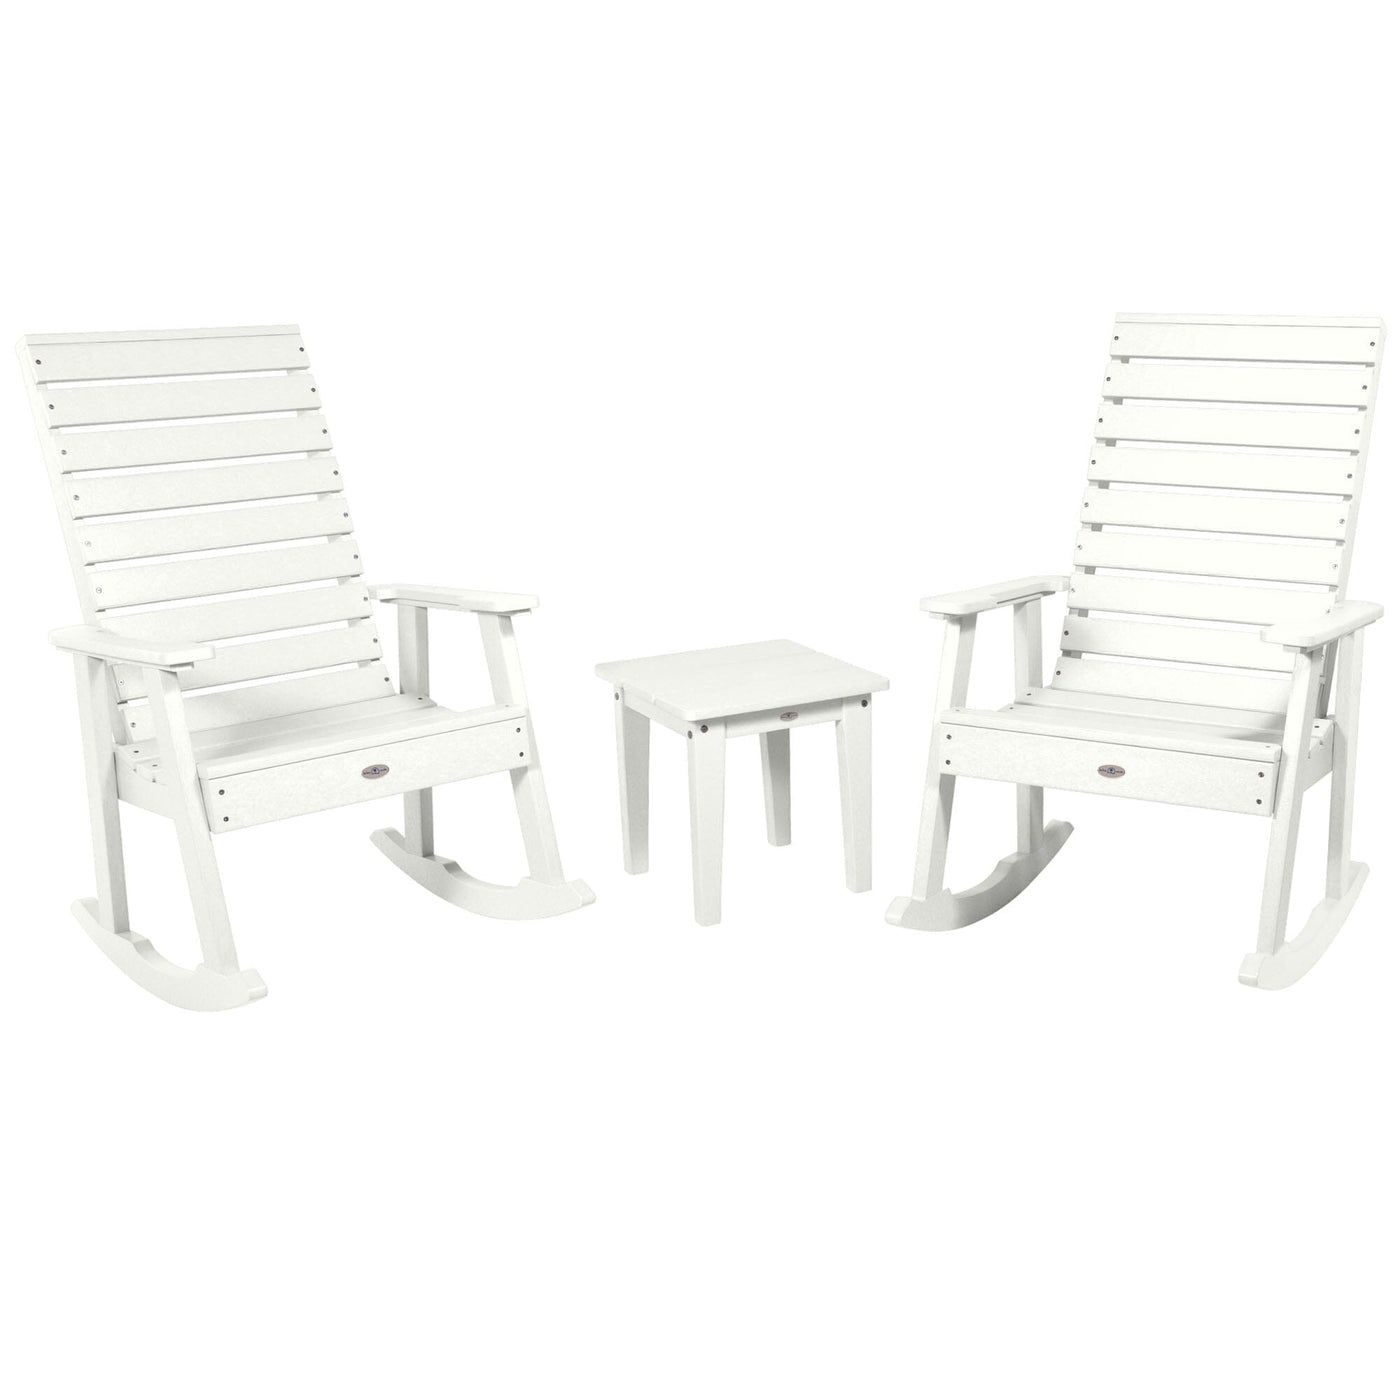 Riverside Rocking Chair and Side Table 3pc Set Kitted Set Bahia Verde Outdoors Coconut White 